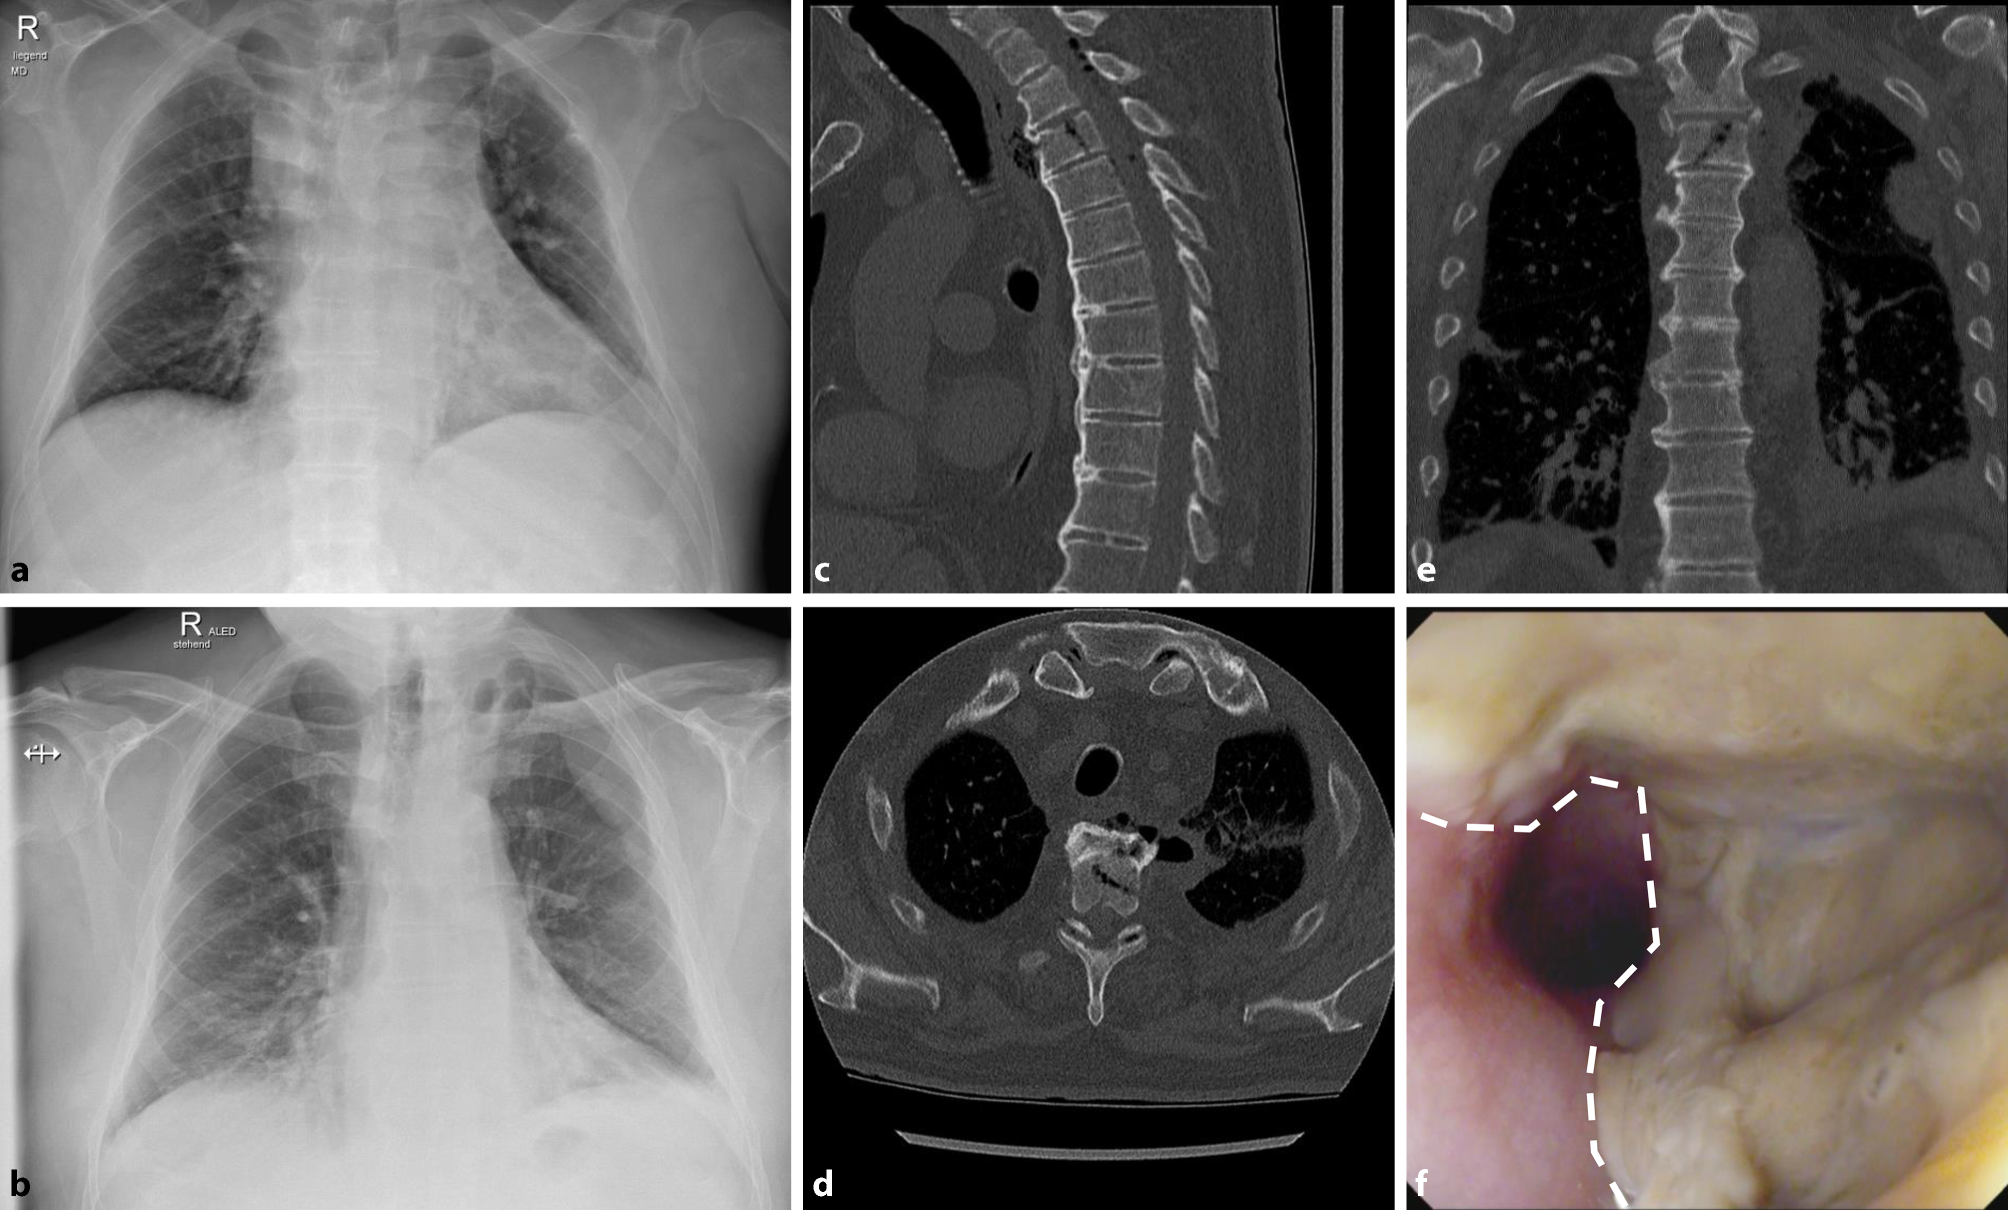 Esophageal perforation with near fatal mediastinitis secondary to Th3 fracture